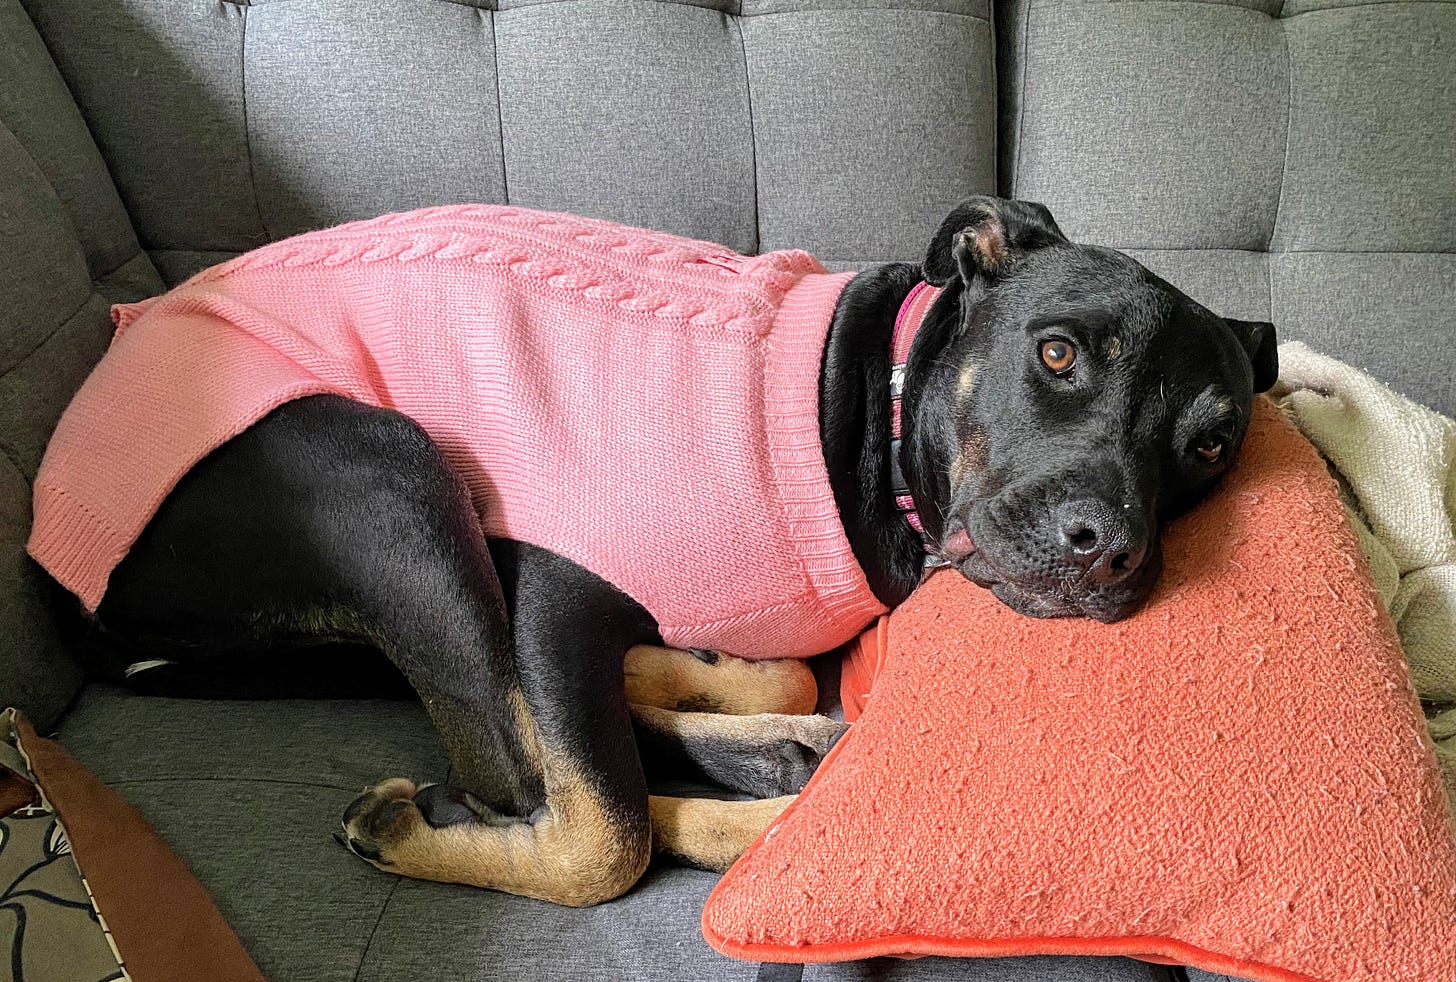 In brighter news, Mabel’s mom bought her a sweater. (Photo: Jennifer Roberts)